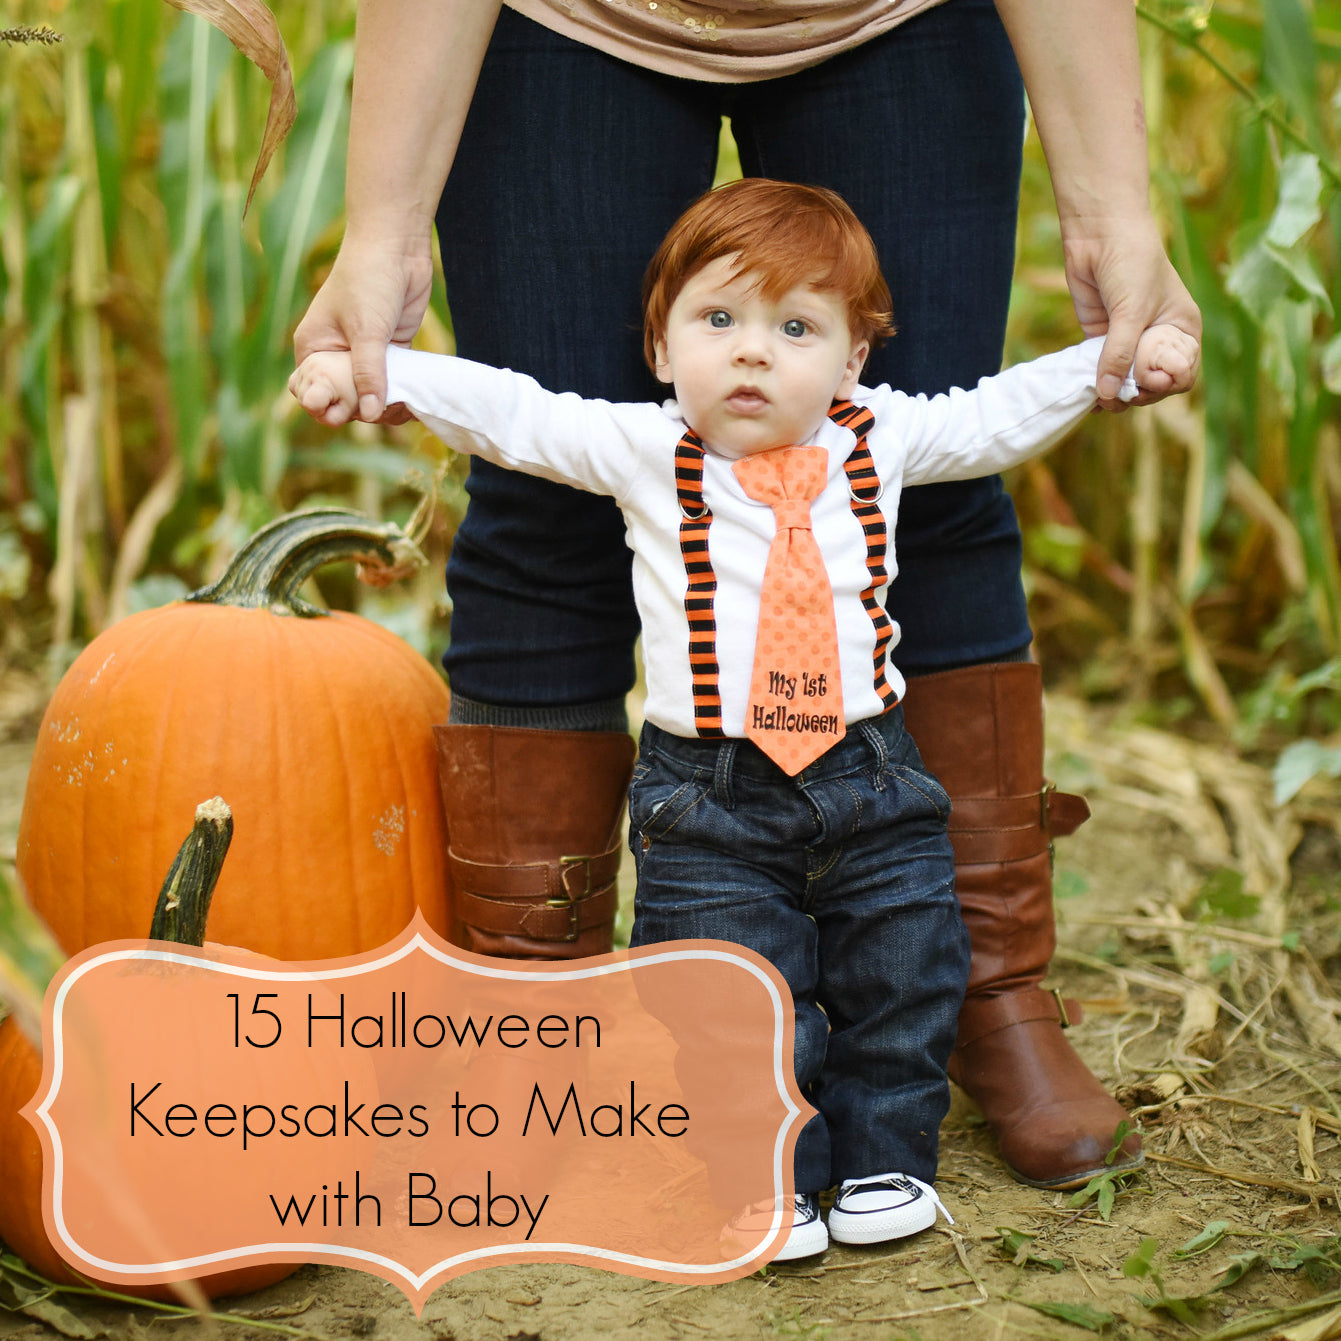 15 Halloween Keepsakes to Make with Baby